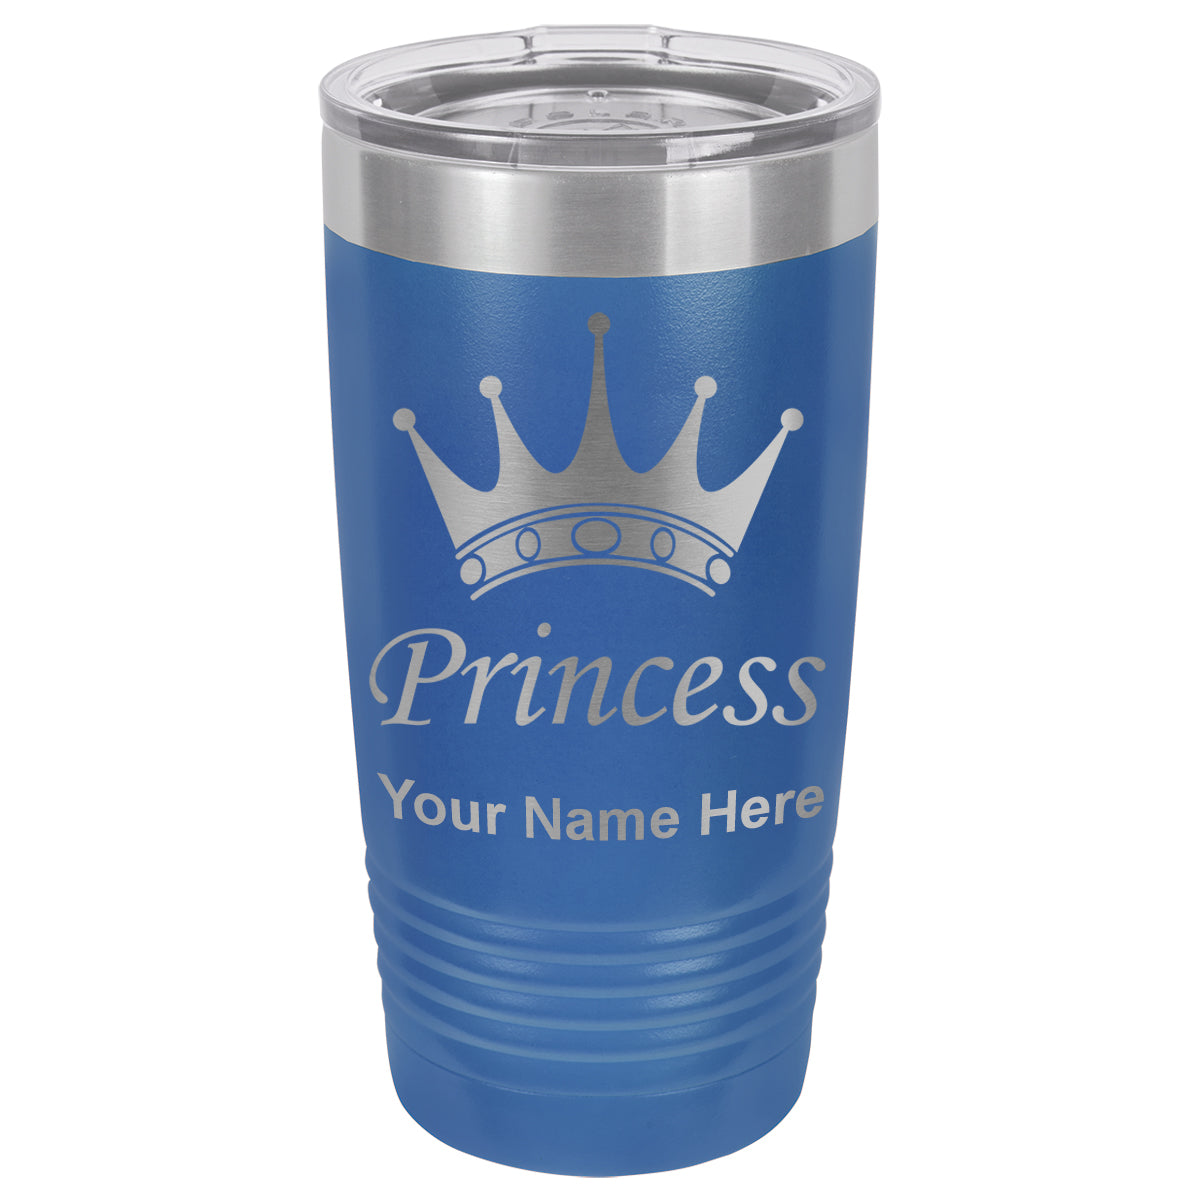 20oz Vacuum Insulated Tumbler Mug, Princess Crown, Personalized Engraving Included